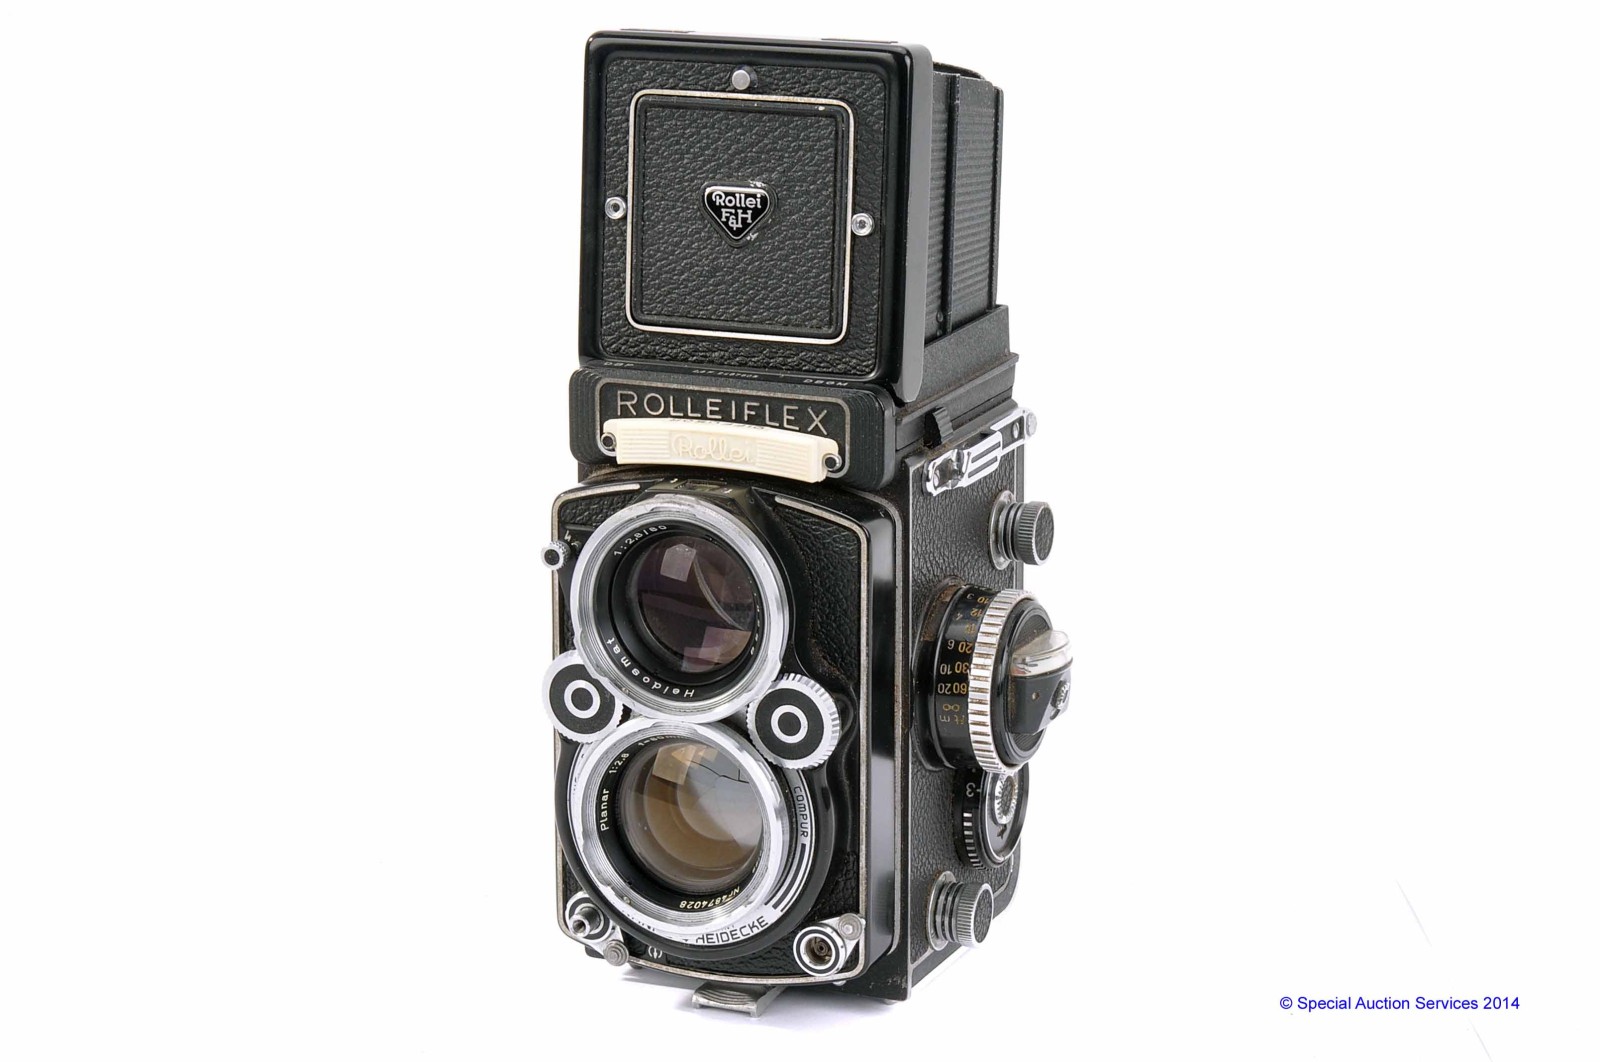 A Rolleiflex 2.8F TLR Camera, serial no. 2467608, with Carl Zeiss Planar f/2.8 80mm lens, body, G,